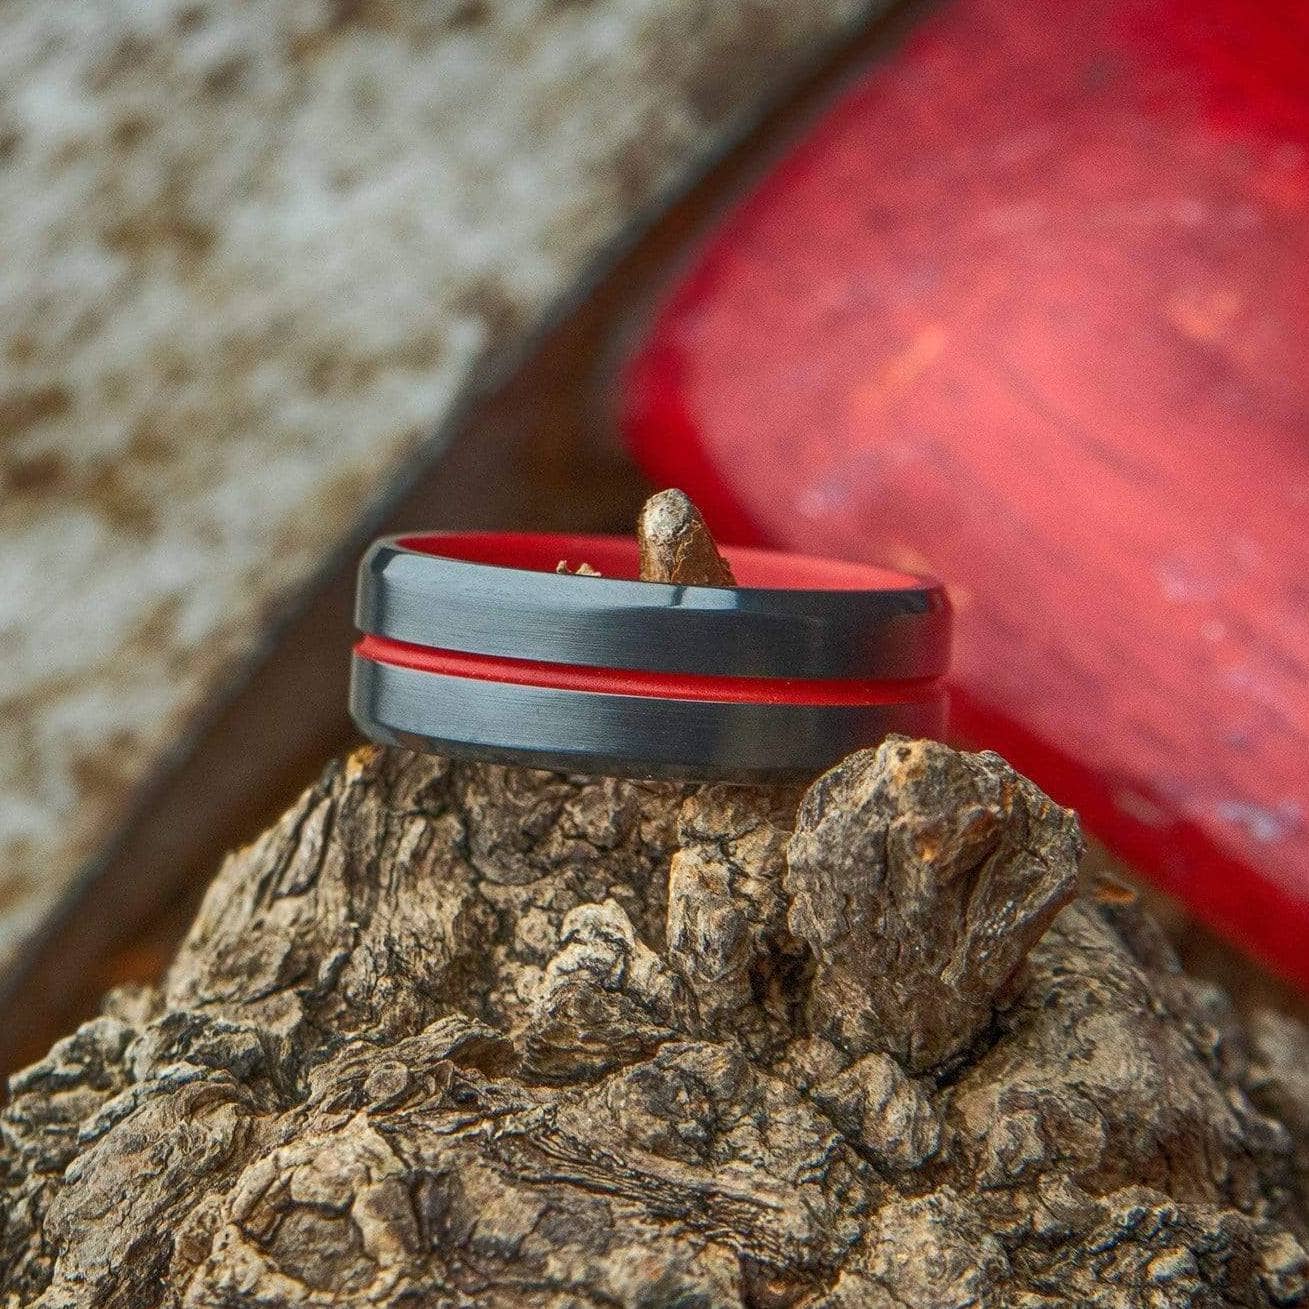 The Fire Chief - Men's Wedding Rings - Manly Bands